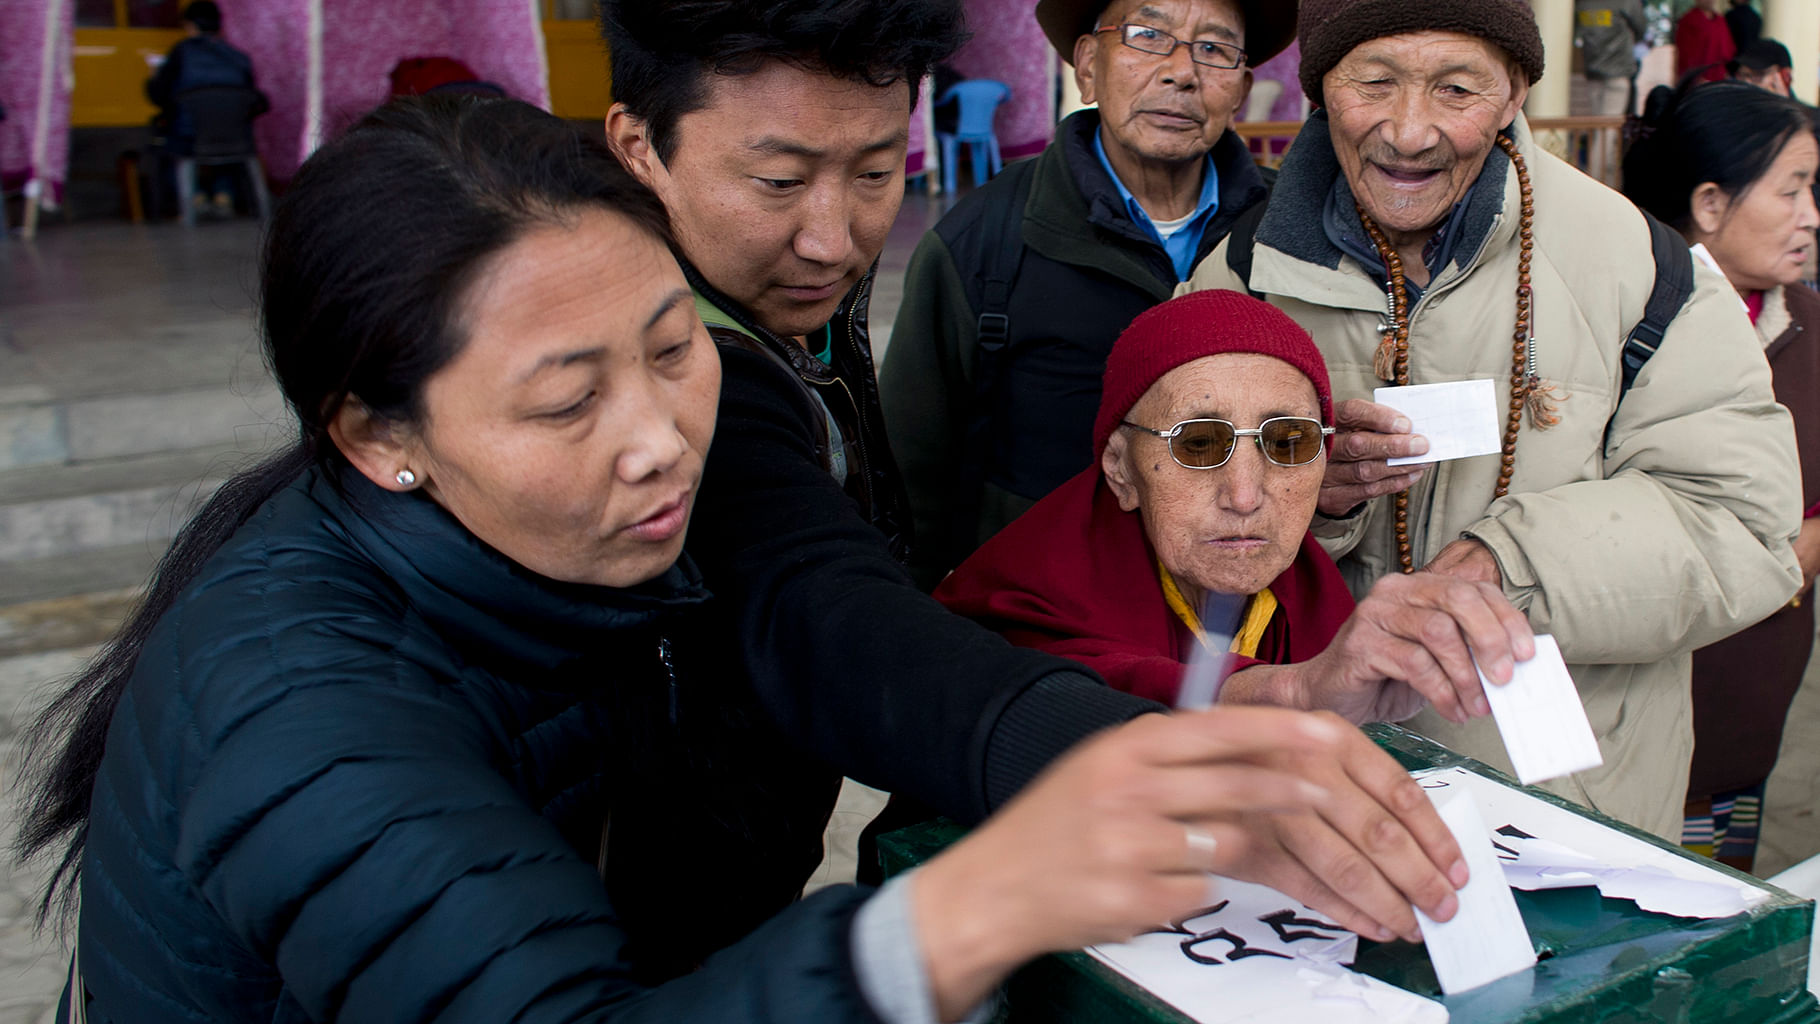 Exiled Tibetans cast their vote to elect the next prime
minister and the parliamentarians in Dharamsala. (Photo: AP) &nbsp; &nbsp; &nbsp;